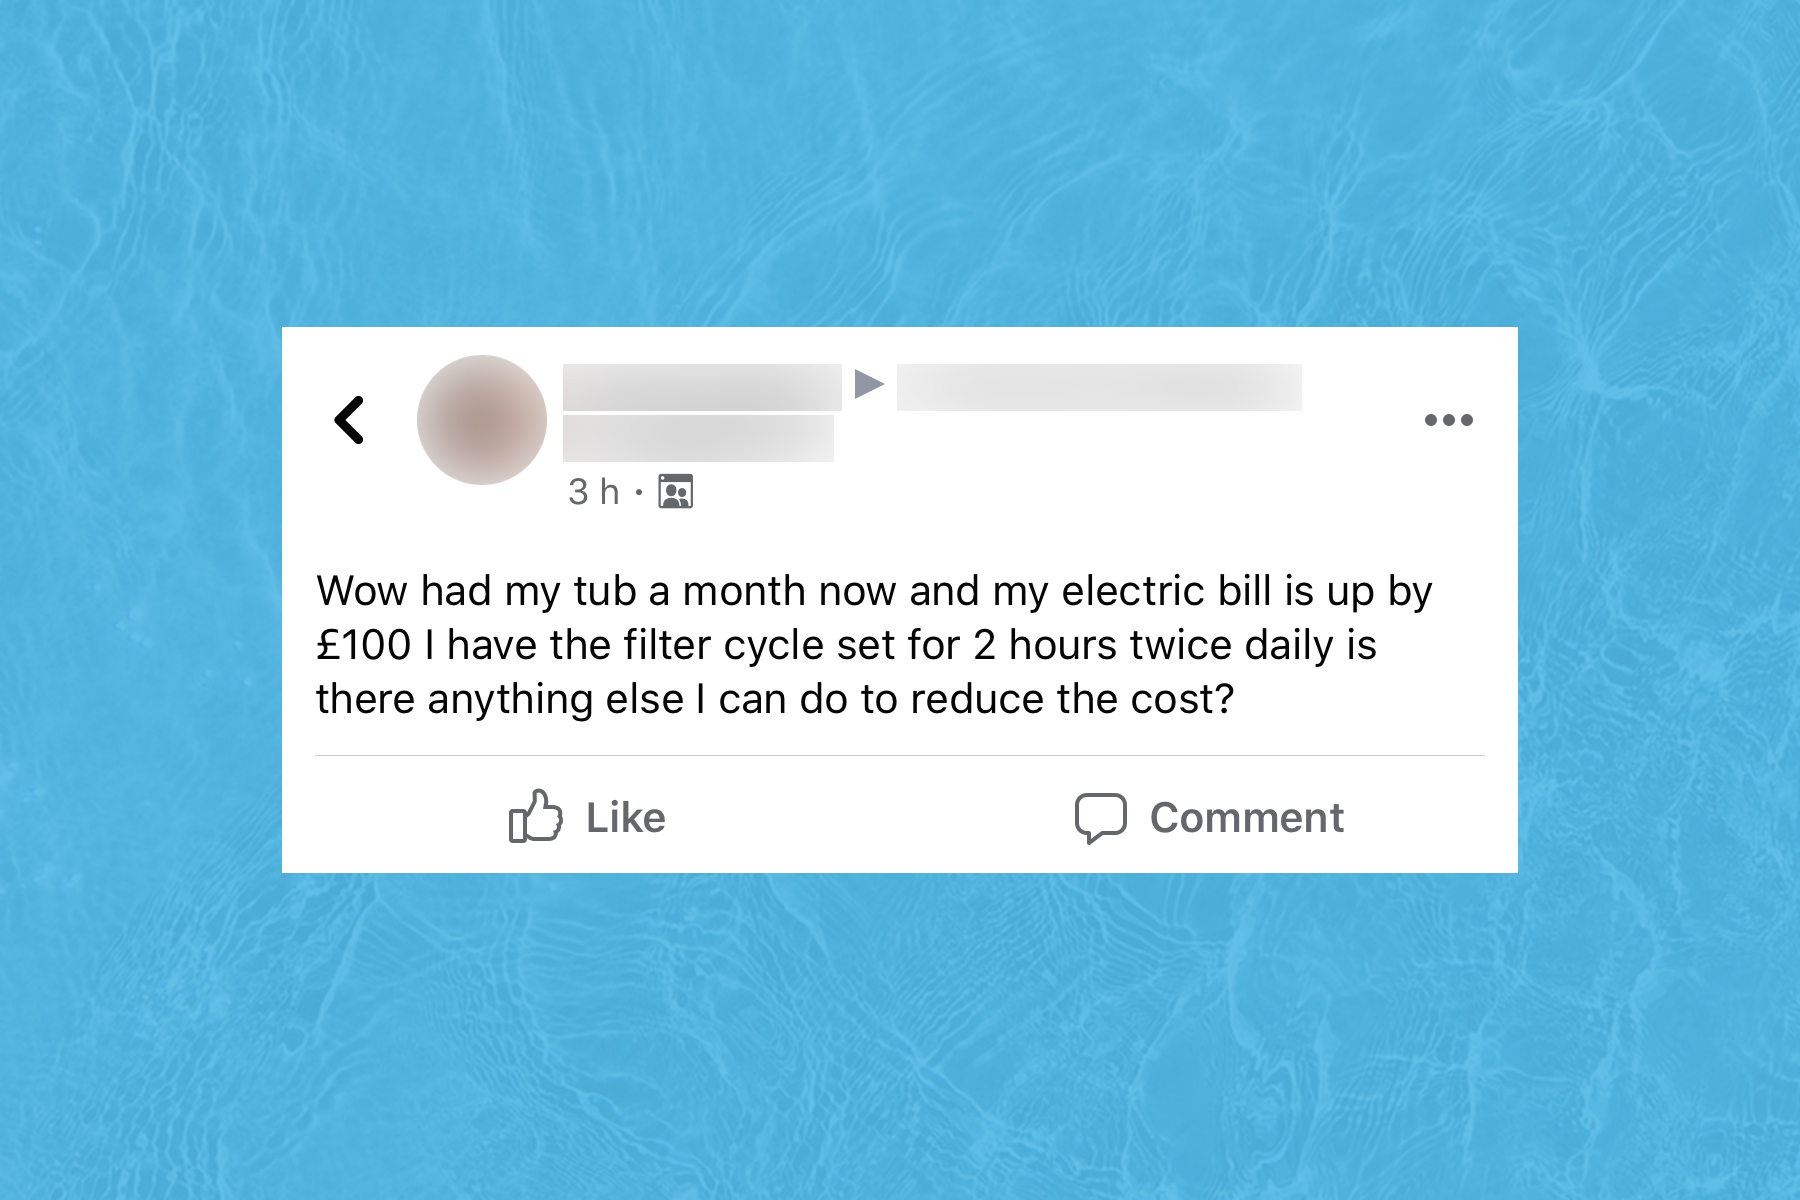 Screenshot of Facebook post asking how to reduce expensive hot tub running costs.